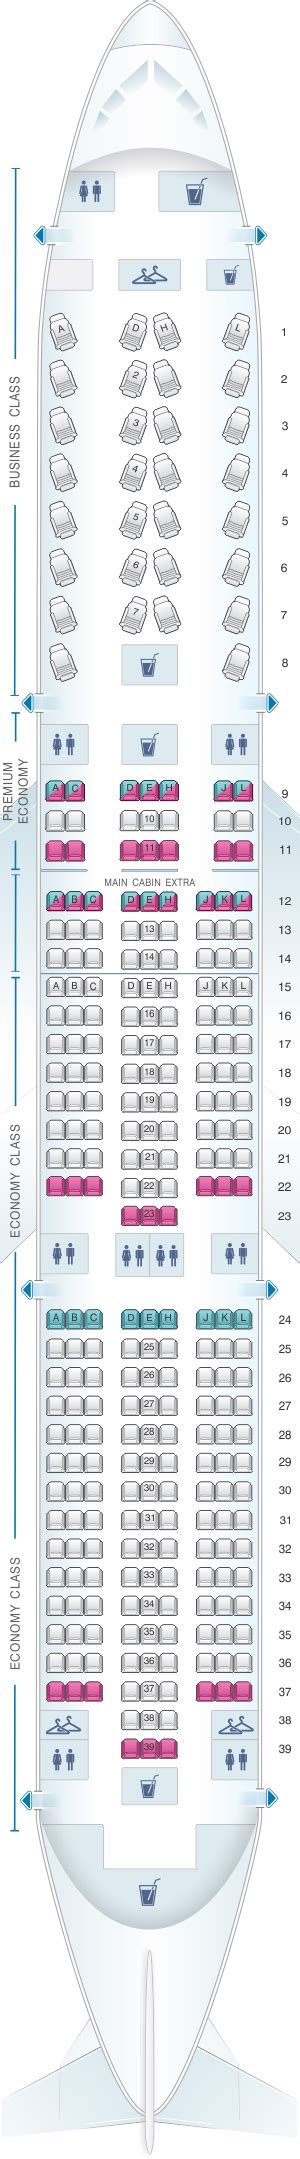 boeing 787-9 american airlines seating chart